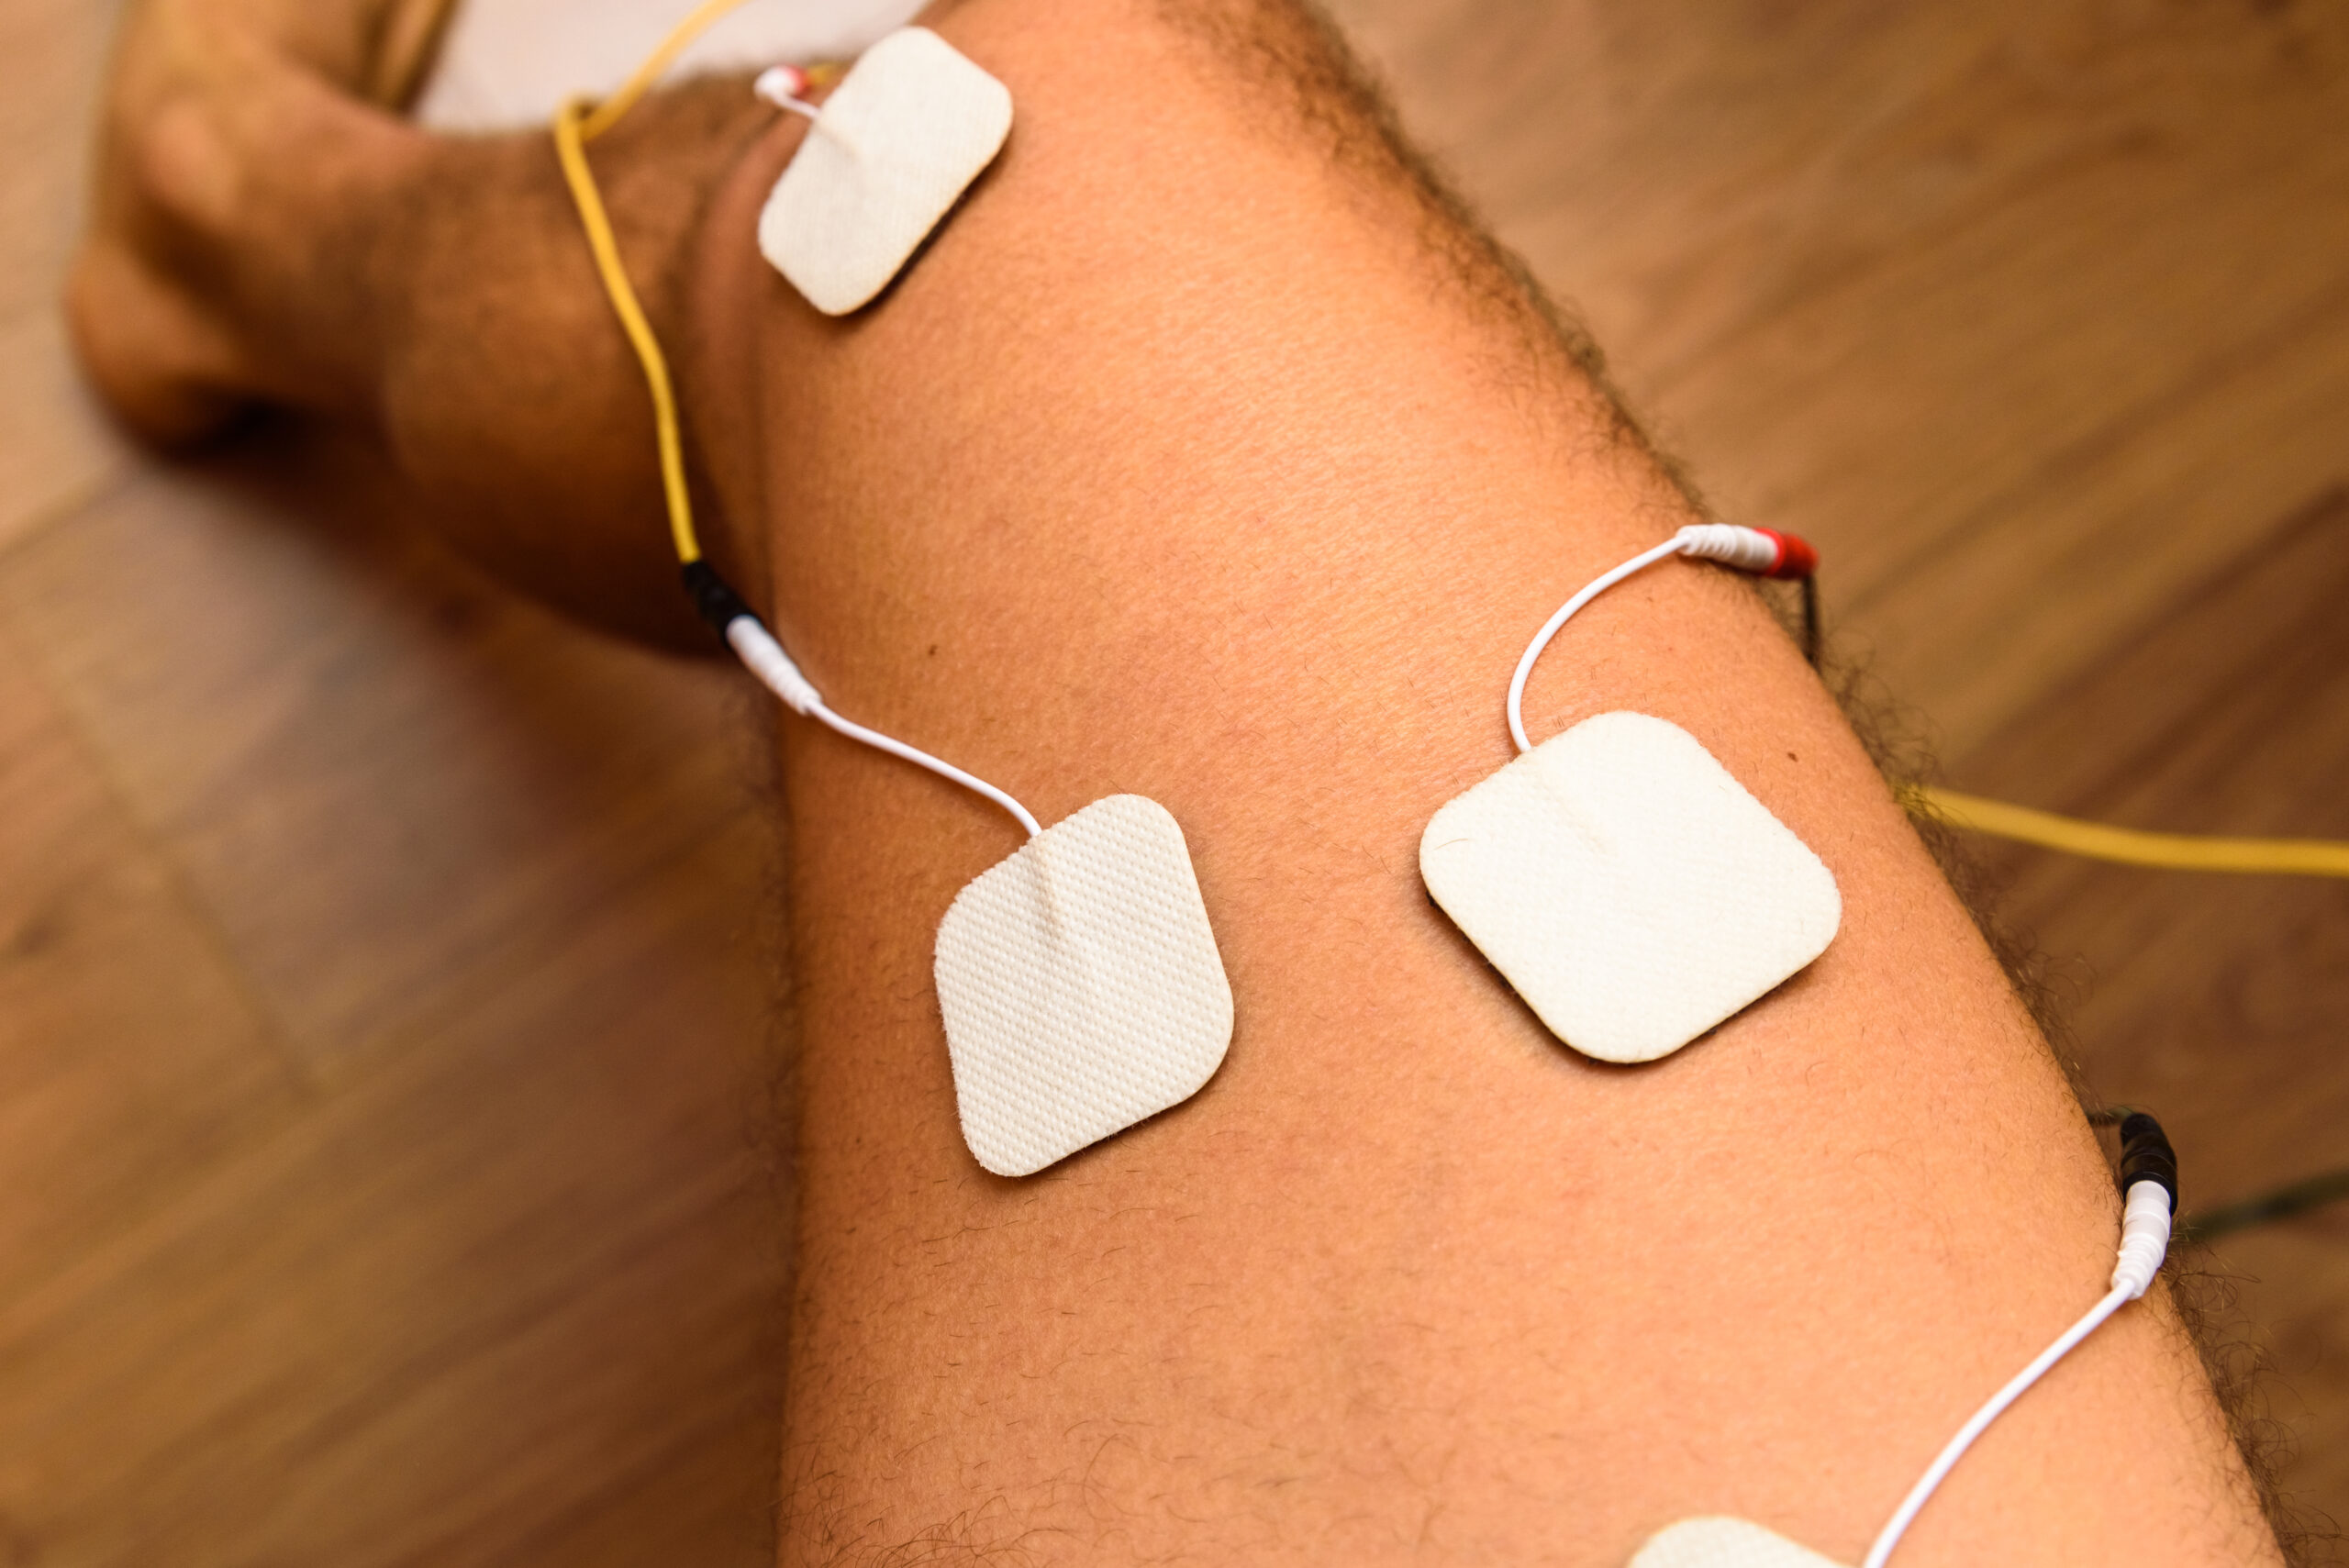 TENS (Transcutaneous Electrical Nerve Stimulation)